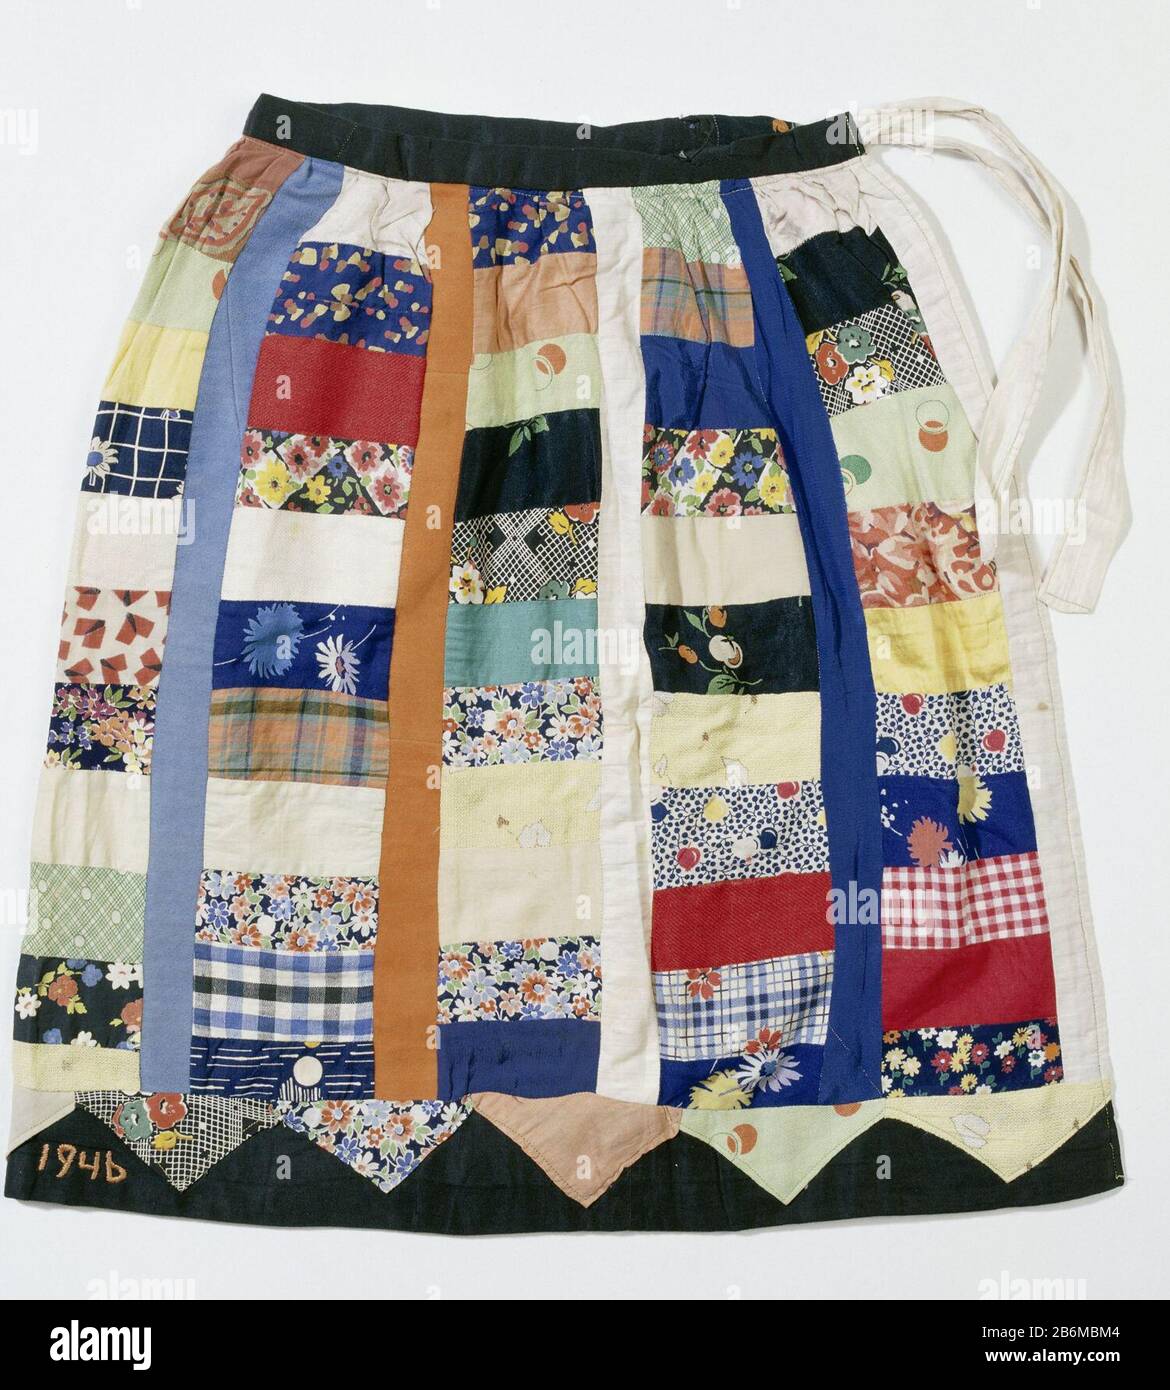 Feestrok, vervaardigd voor de aktie Nationale Feestrok Multicolor wrap  skirt with black waistband and black border on the bottom. There's a ribbon  waistband. The skirt is made up of rectangular patches with